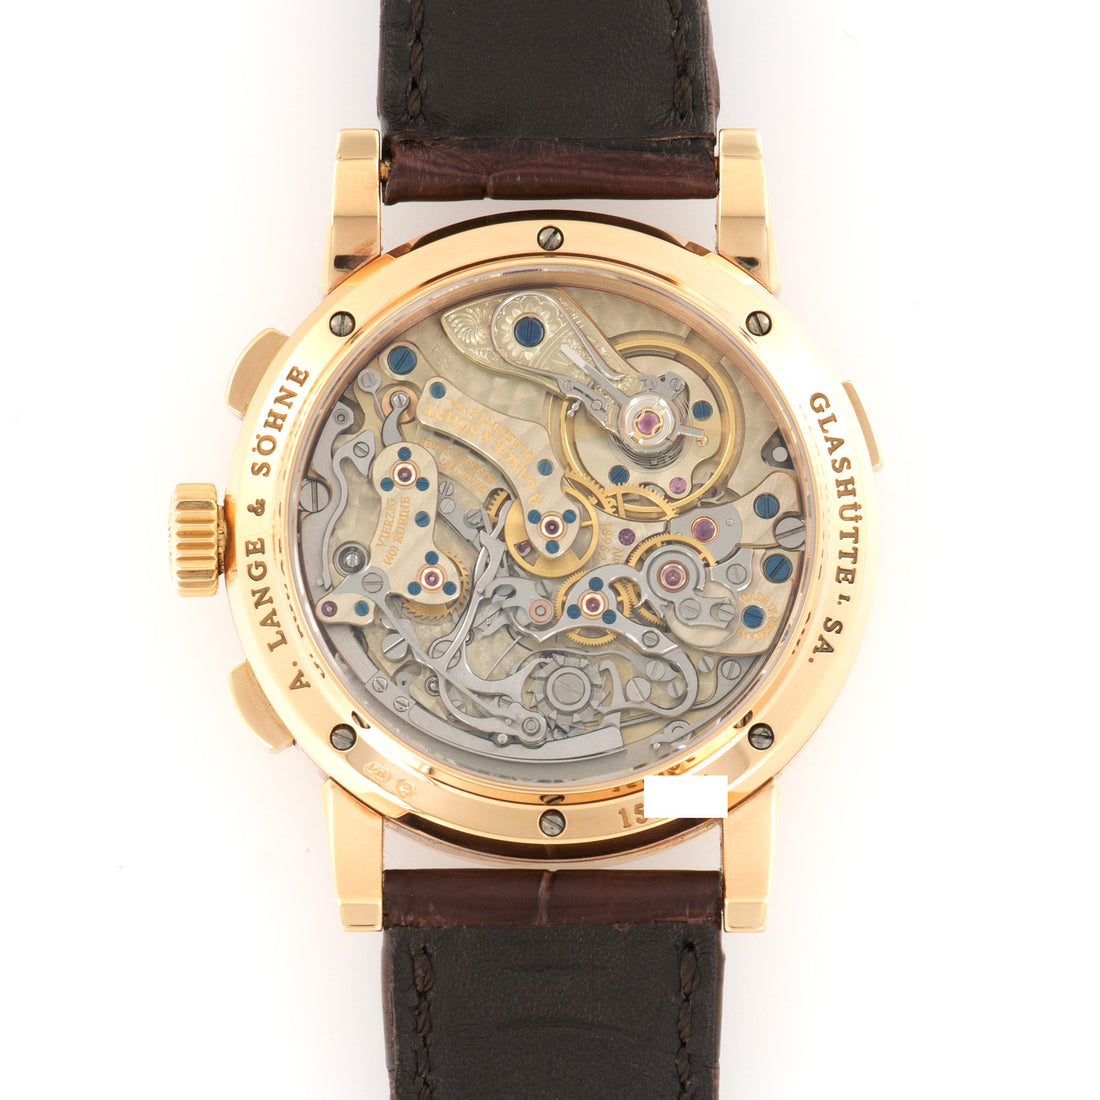 A. Lange & Sohne Rose Gold Datograph Dufour Watch Ref. 403.031